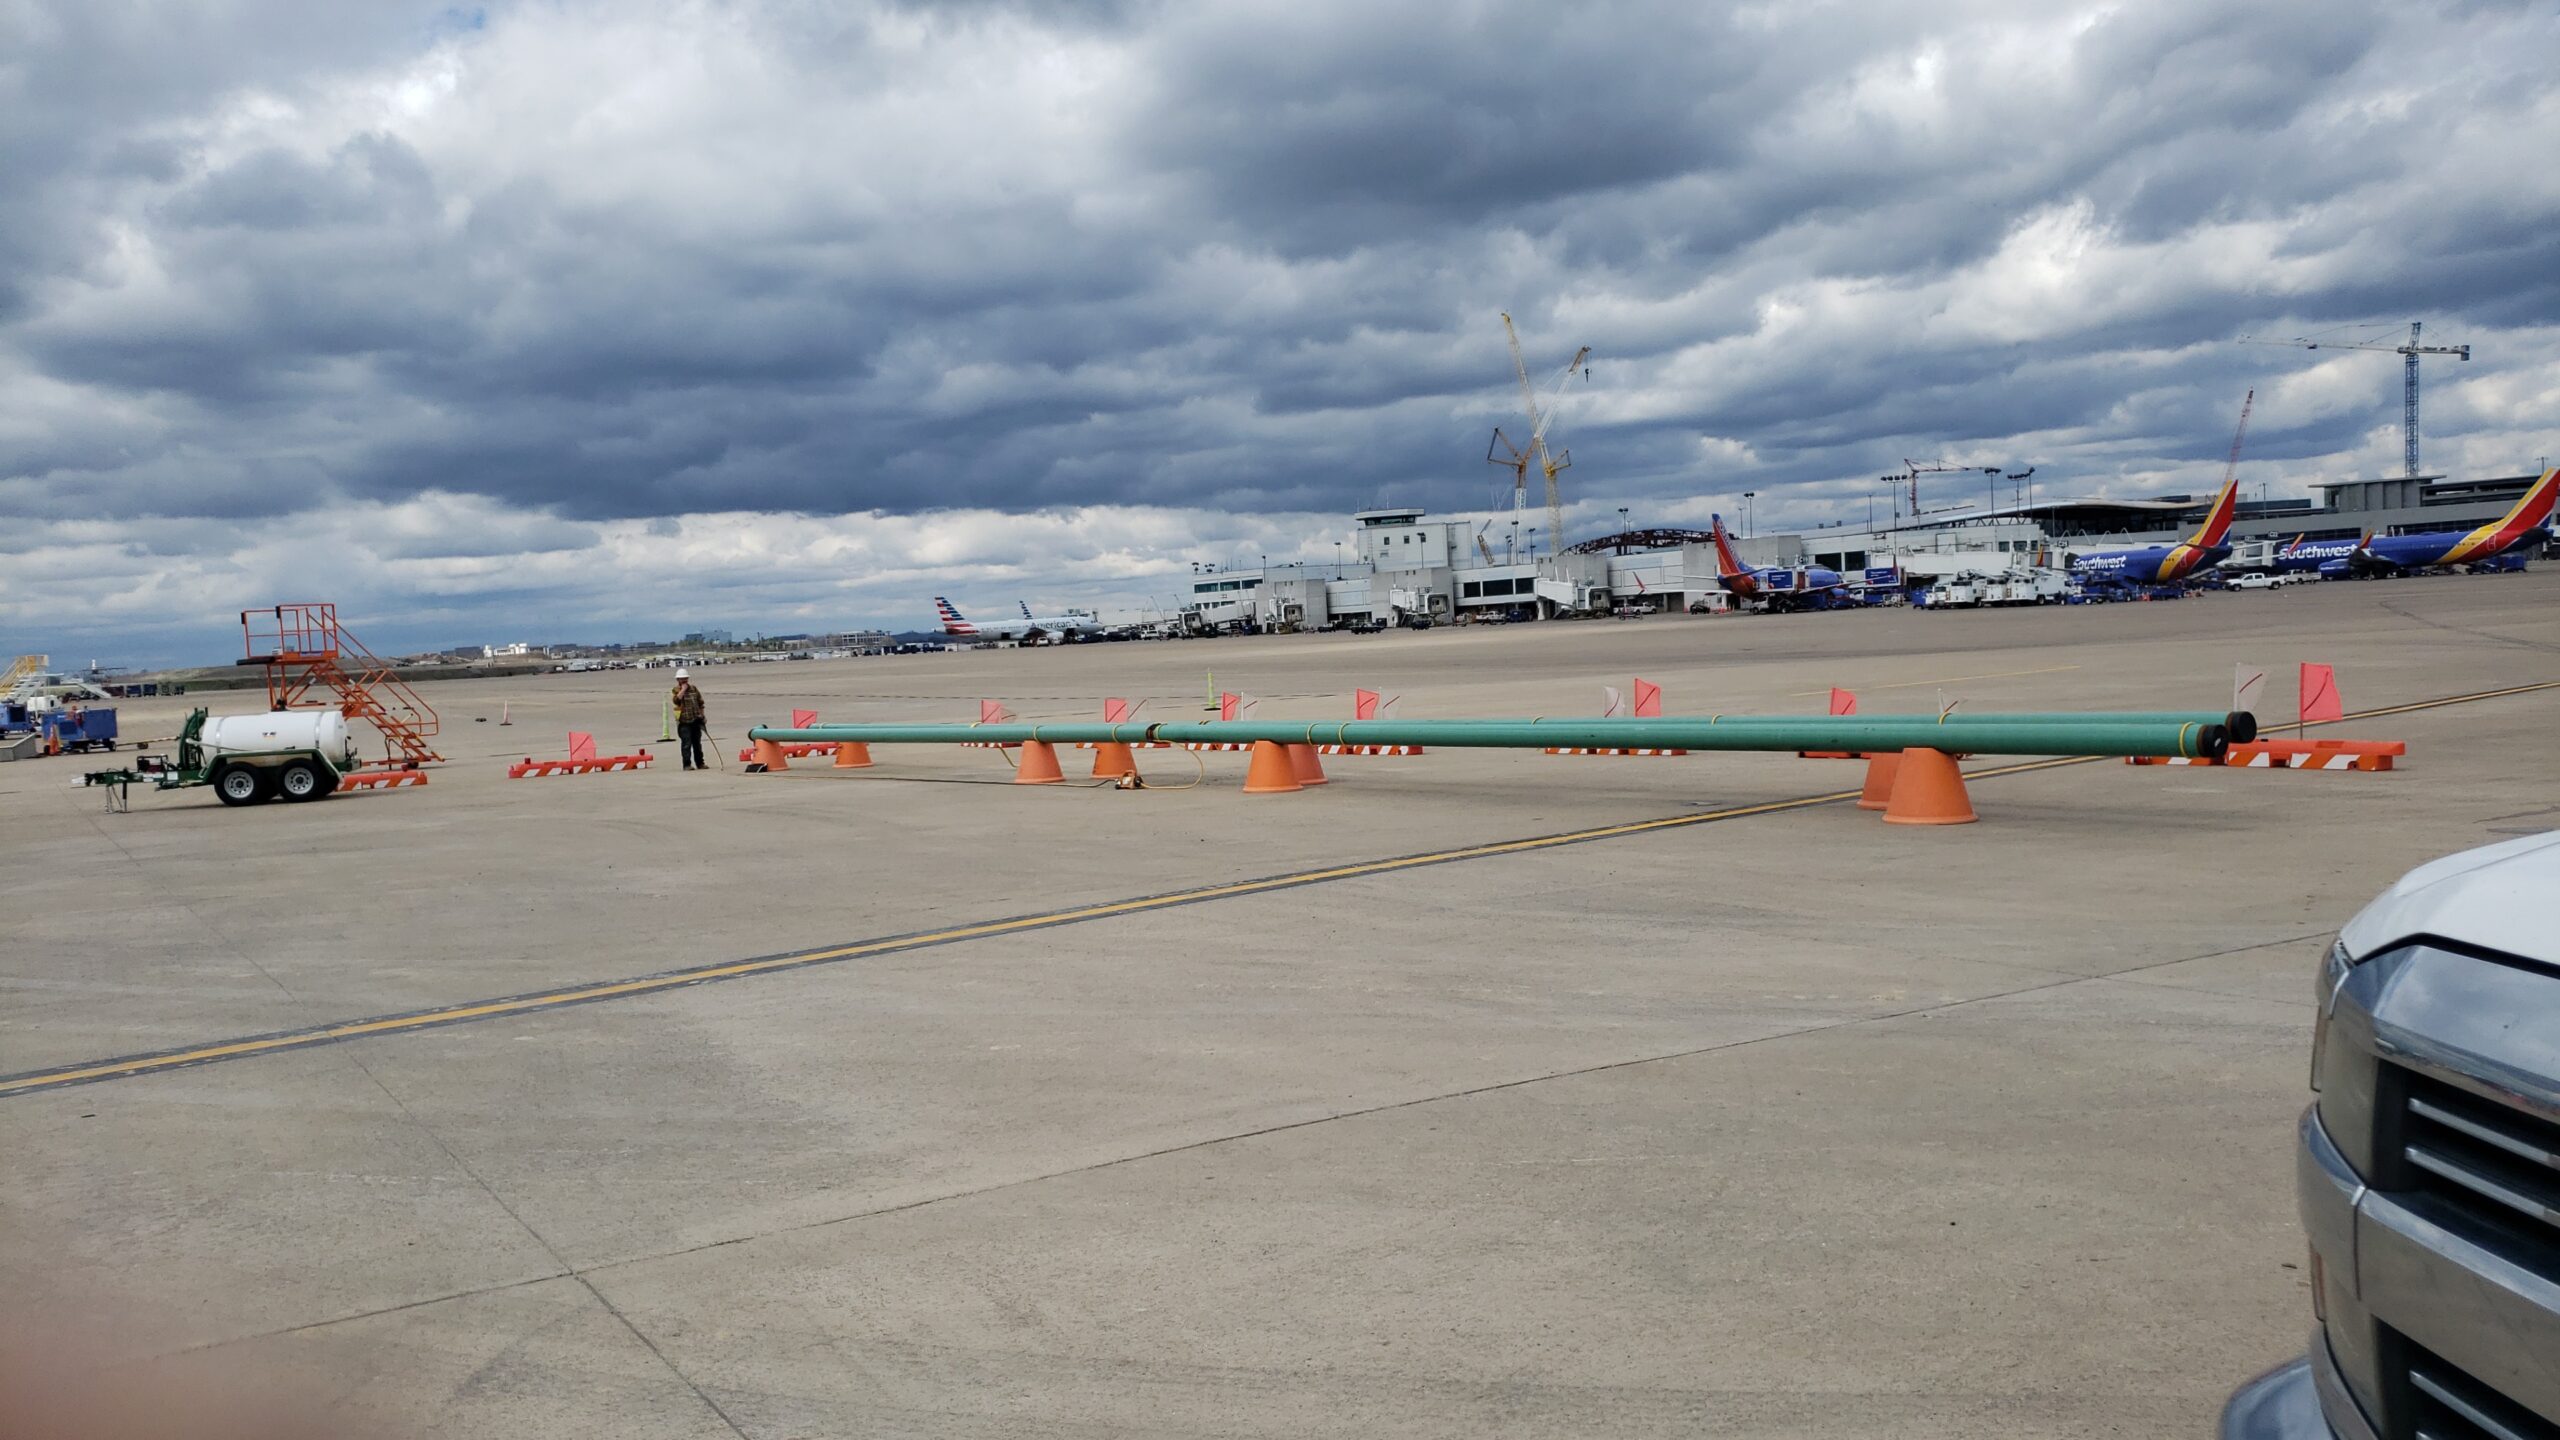 Airport tarmac at Nashville International Airport with safety cones, aircraft, and ground handling equipment under a cloudy sky.